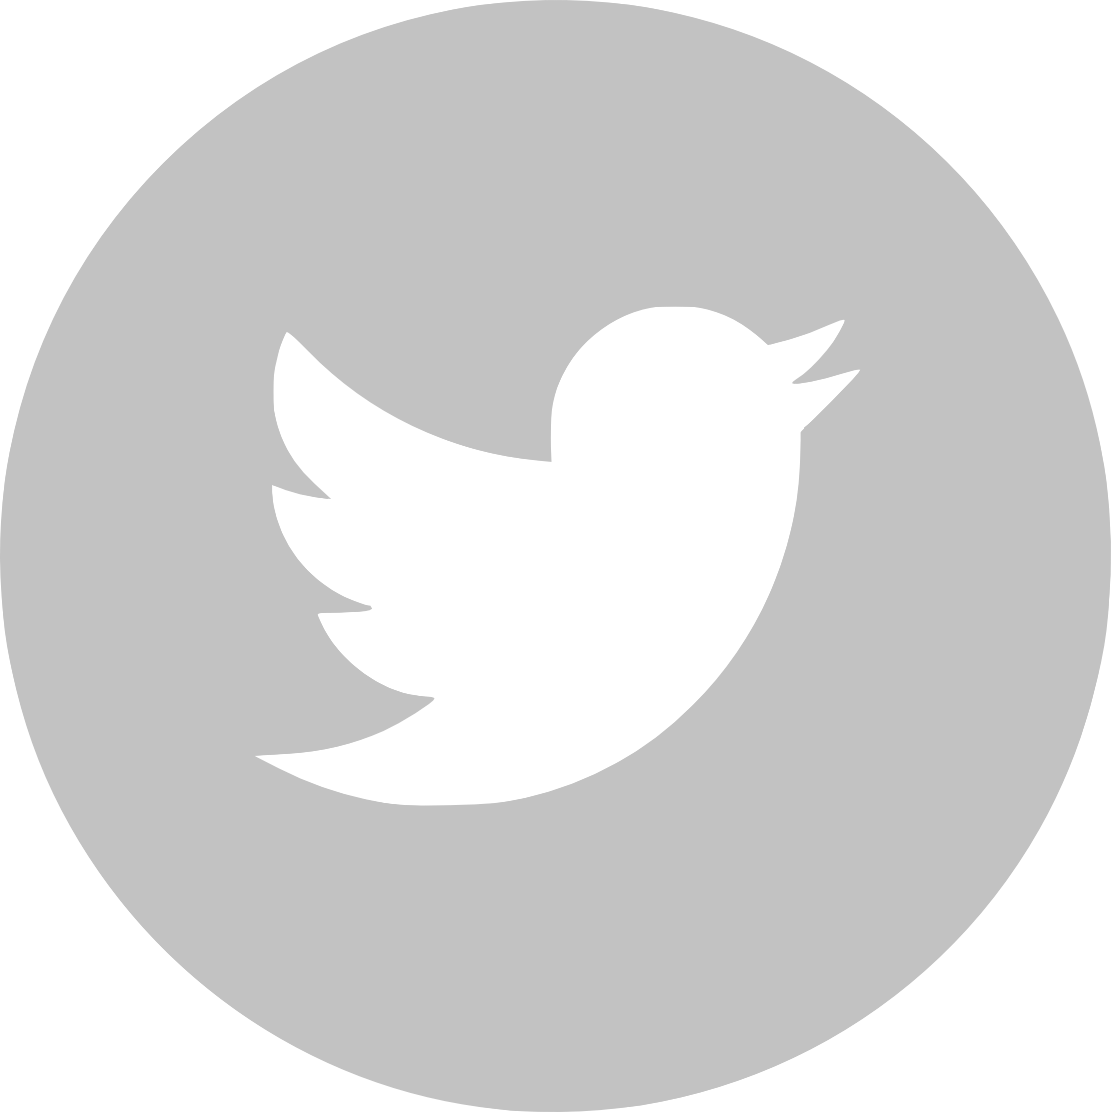 Download Twitter Logo White Vector Facebook Logo Grey Round Png Image With No Background Pngkey Com